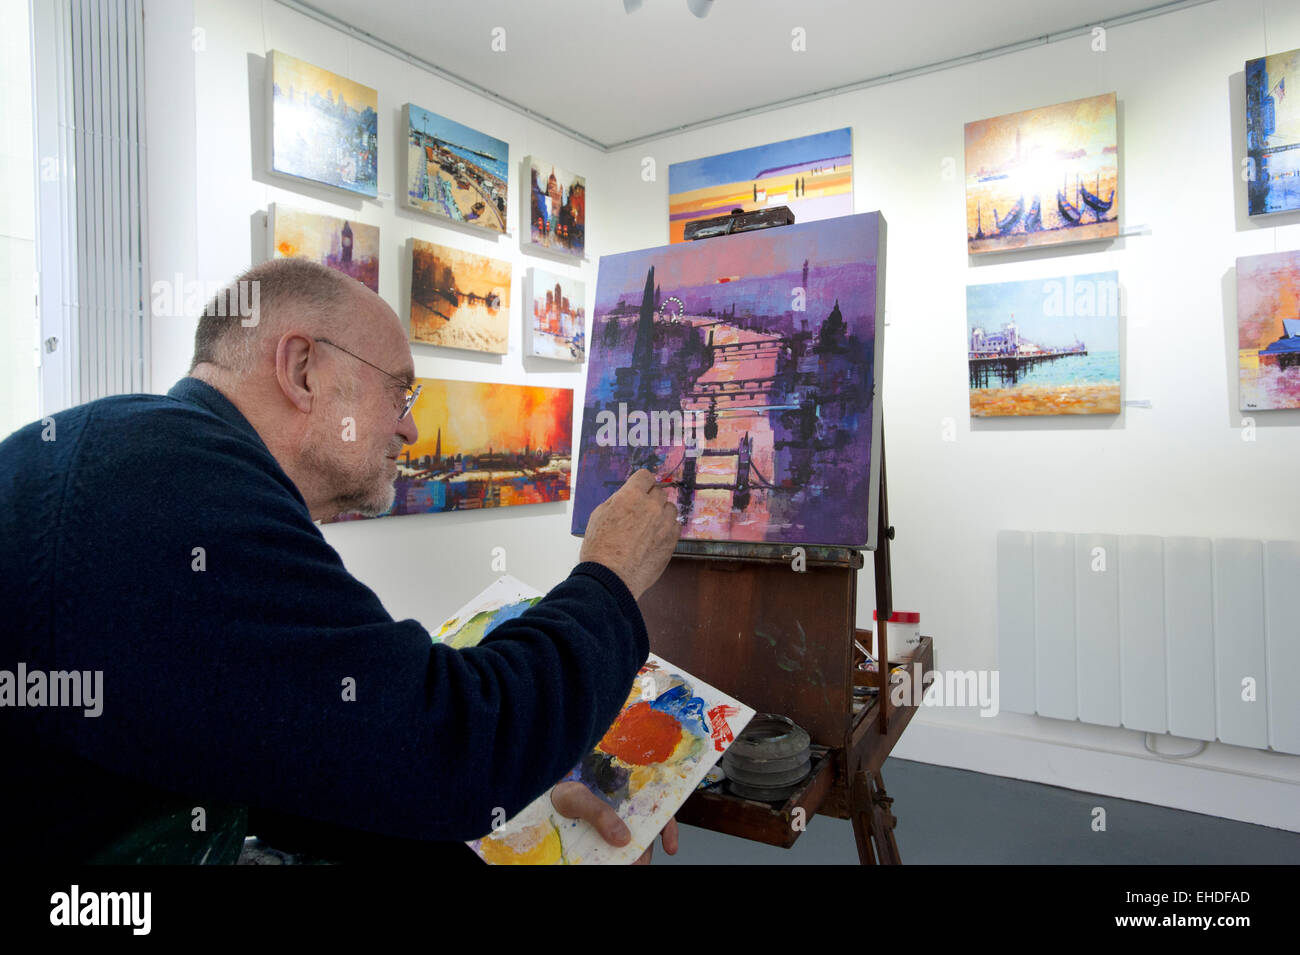 Picture by Roger Bamber : 21 February 2015 : Brighton Artist Colin Ruffell works on an Acrylograph of a Painting of Tower Bridge and the River Thames in London plus other paintings on display during his one man show at 35 North, a Contemporary fine art gallery in Brighton. Stock Photo